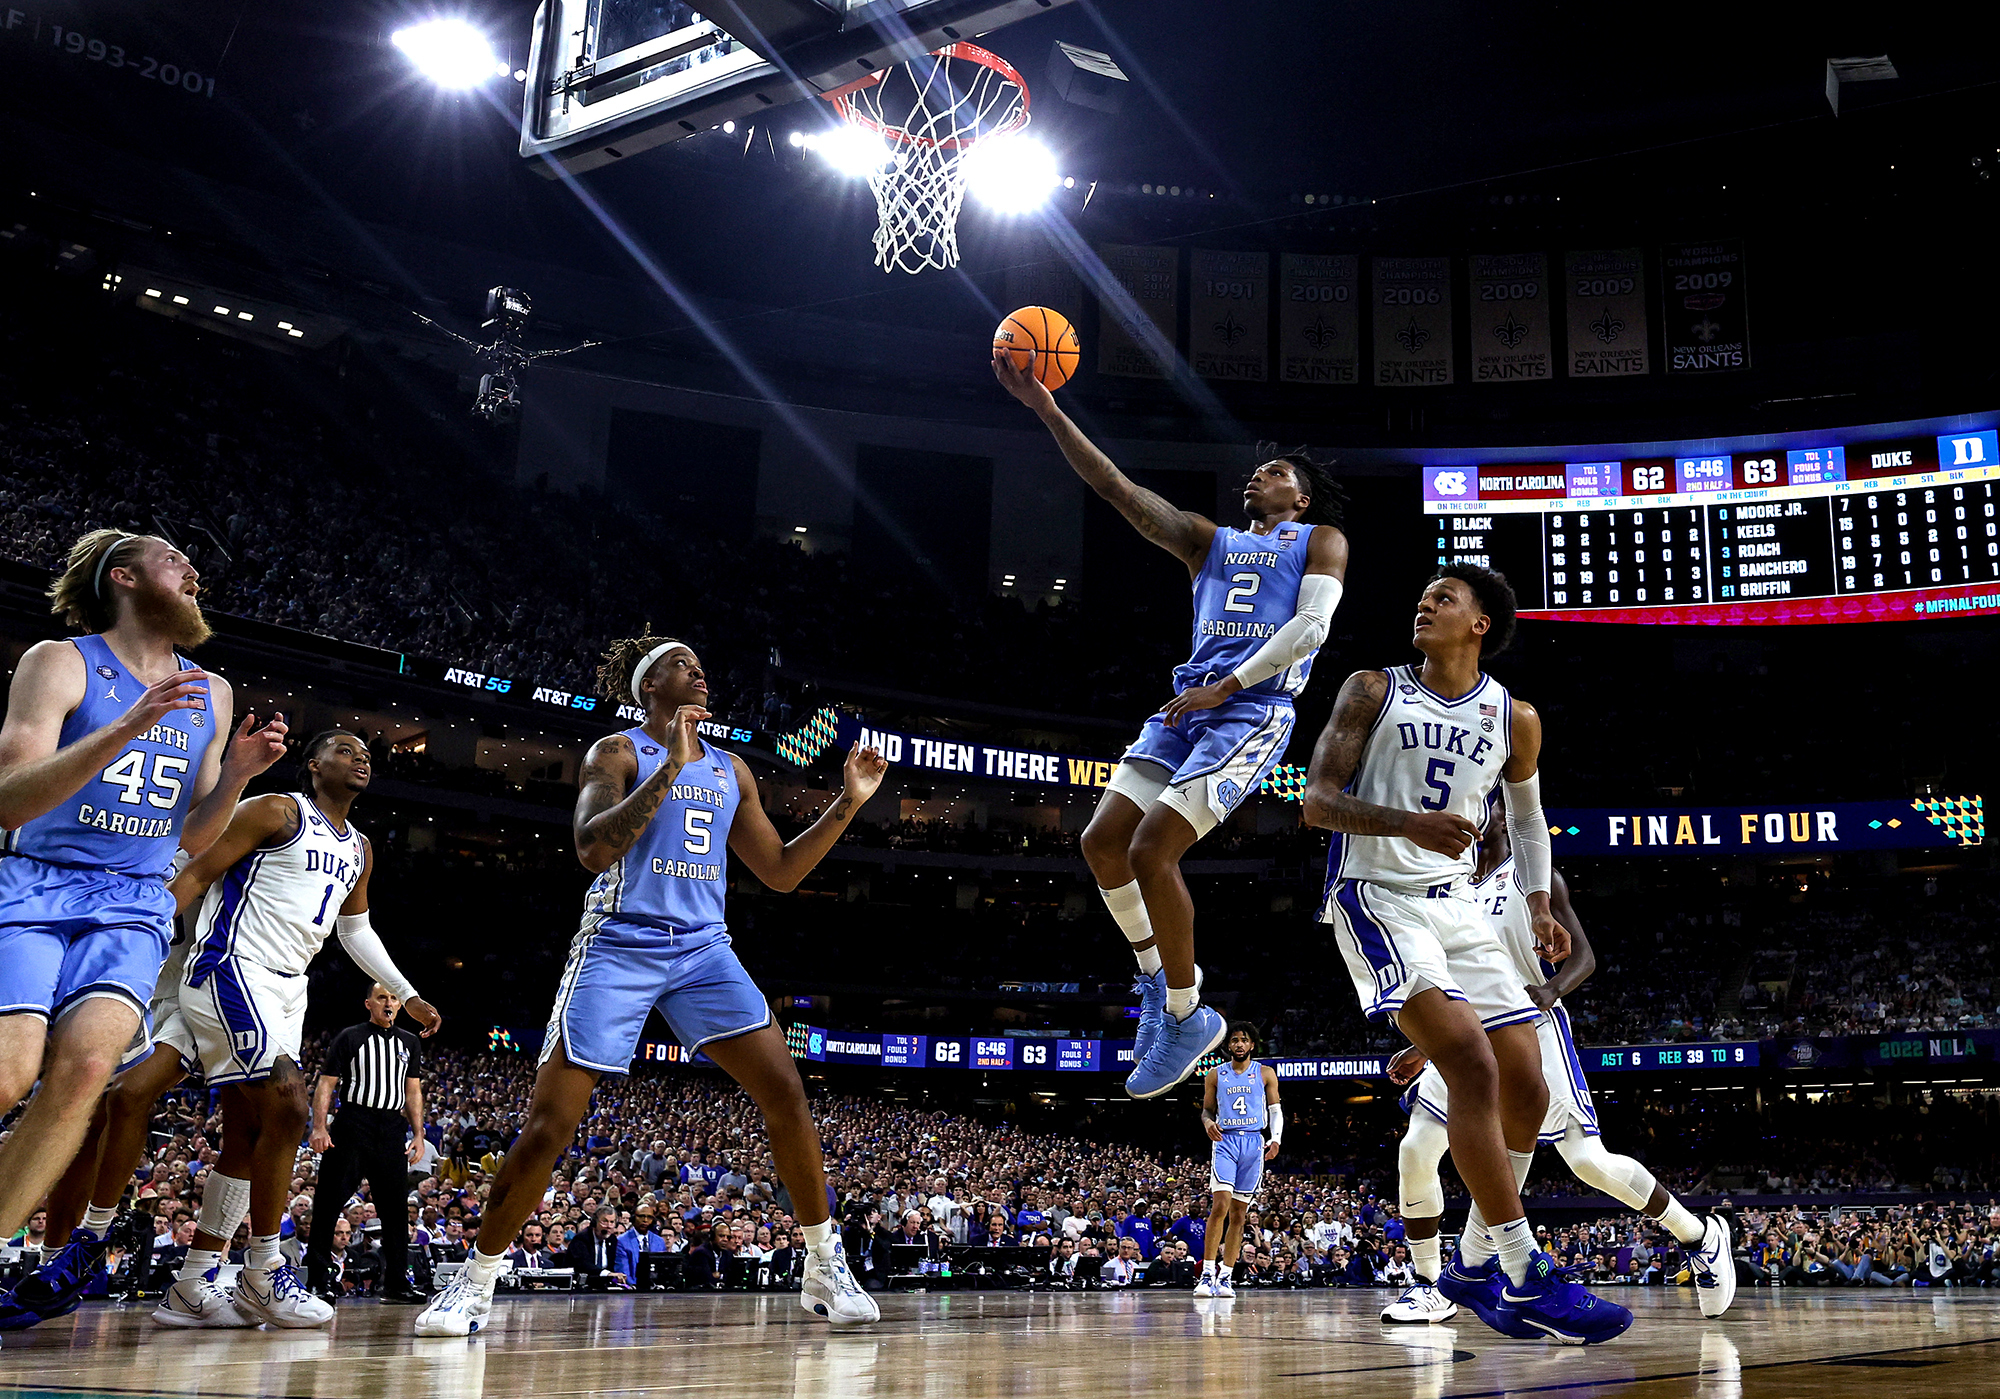 A UNC player goes in for a lay-up against Duke.